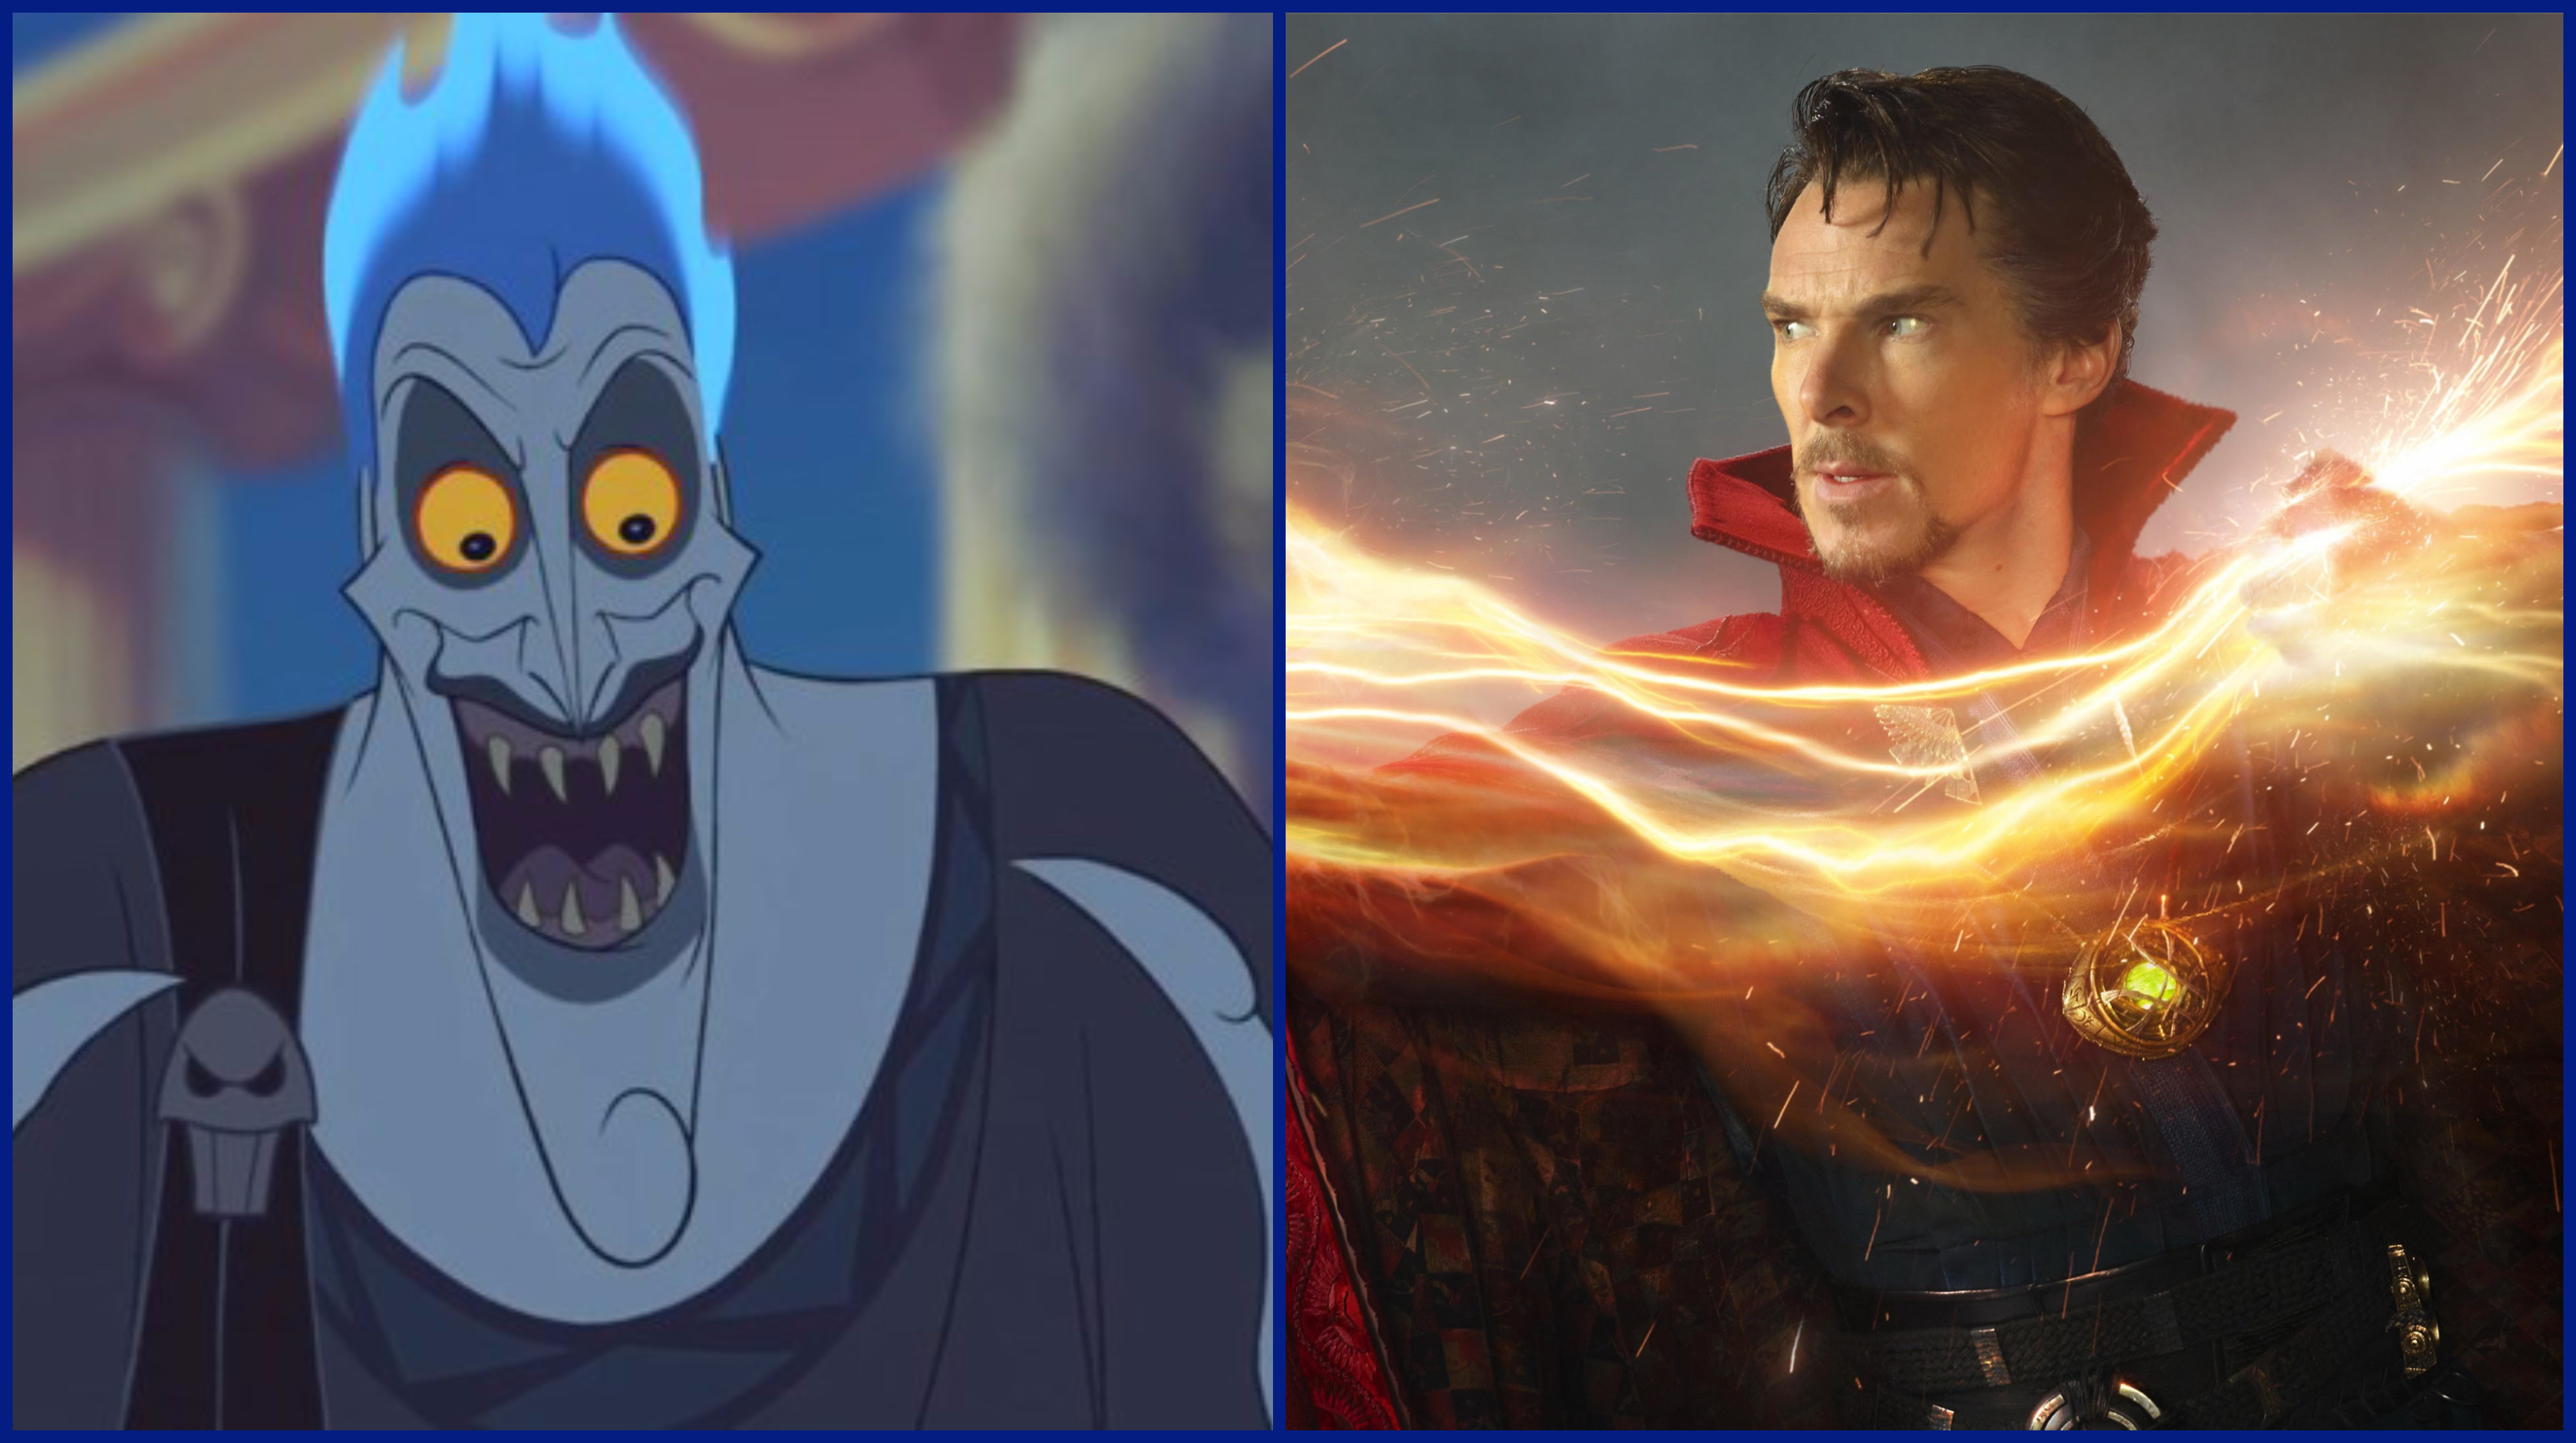 Disney Rumored to be Eyeing Benedict Cumberbatch for Hades in Live-Action ‘Hercules’